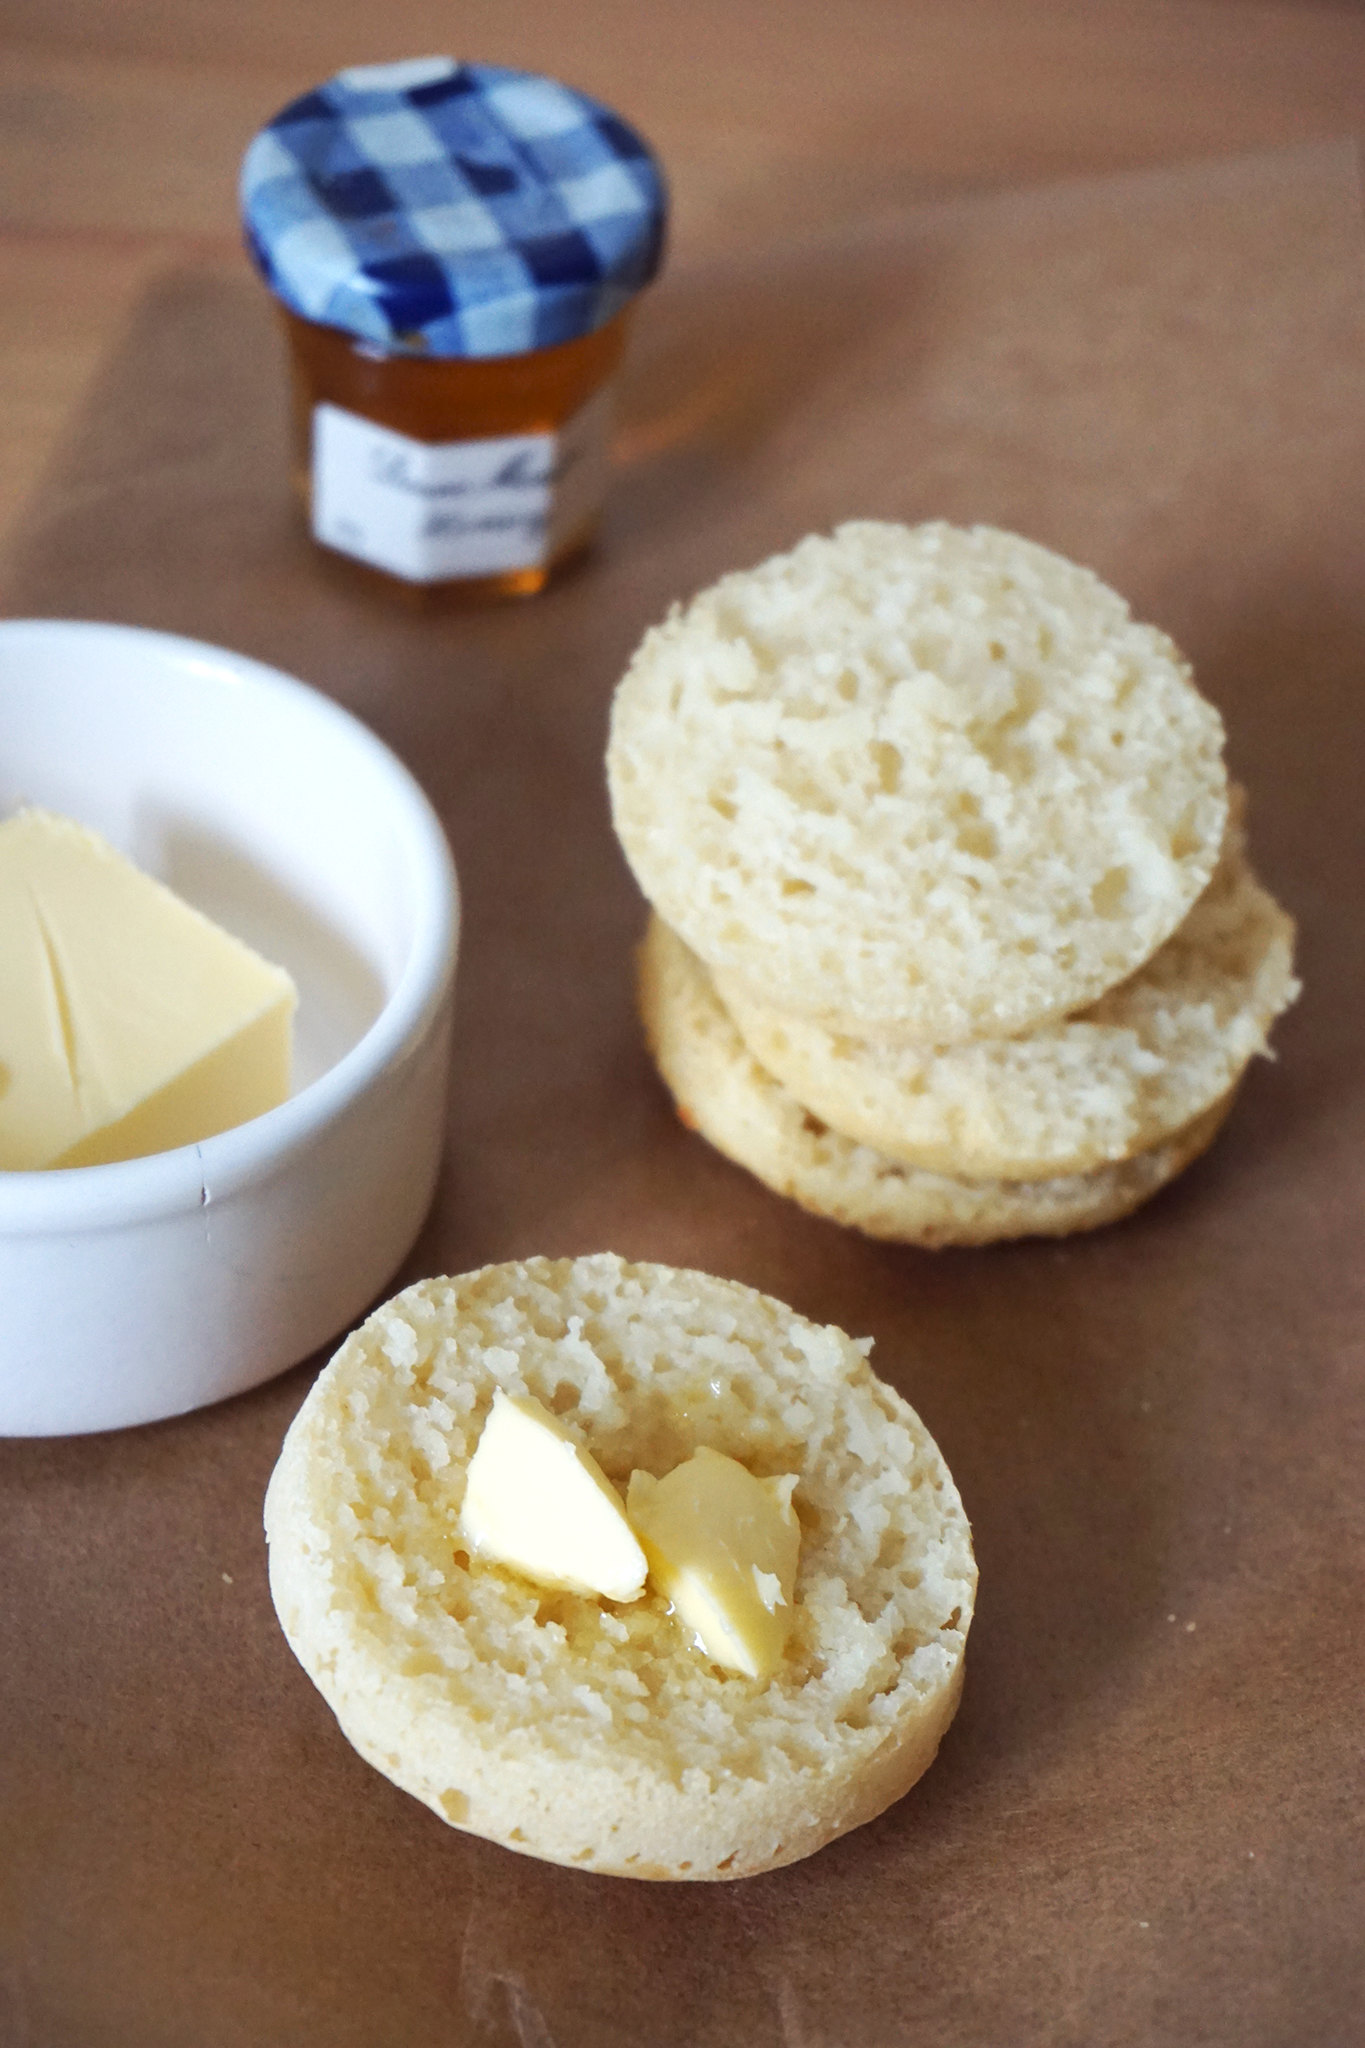 Baked gluten free crumpets with butter